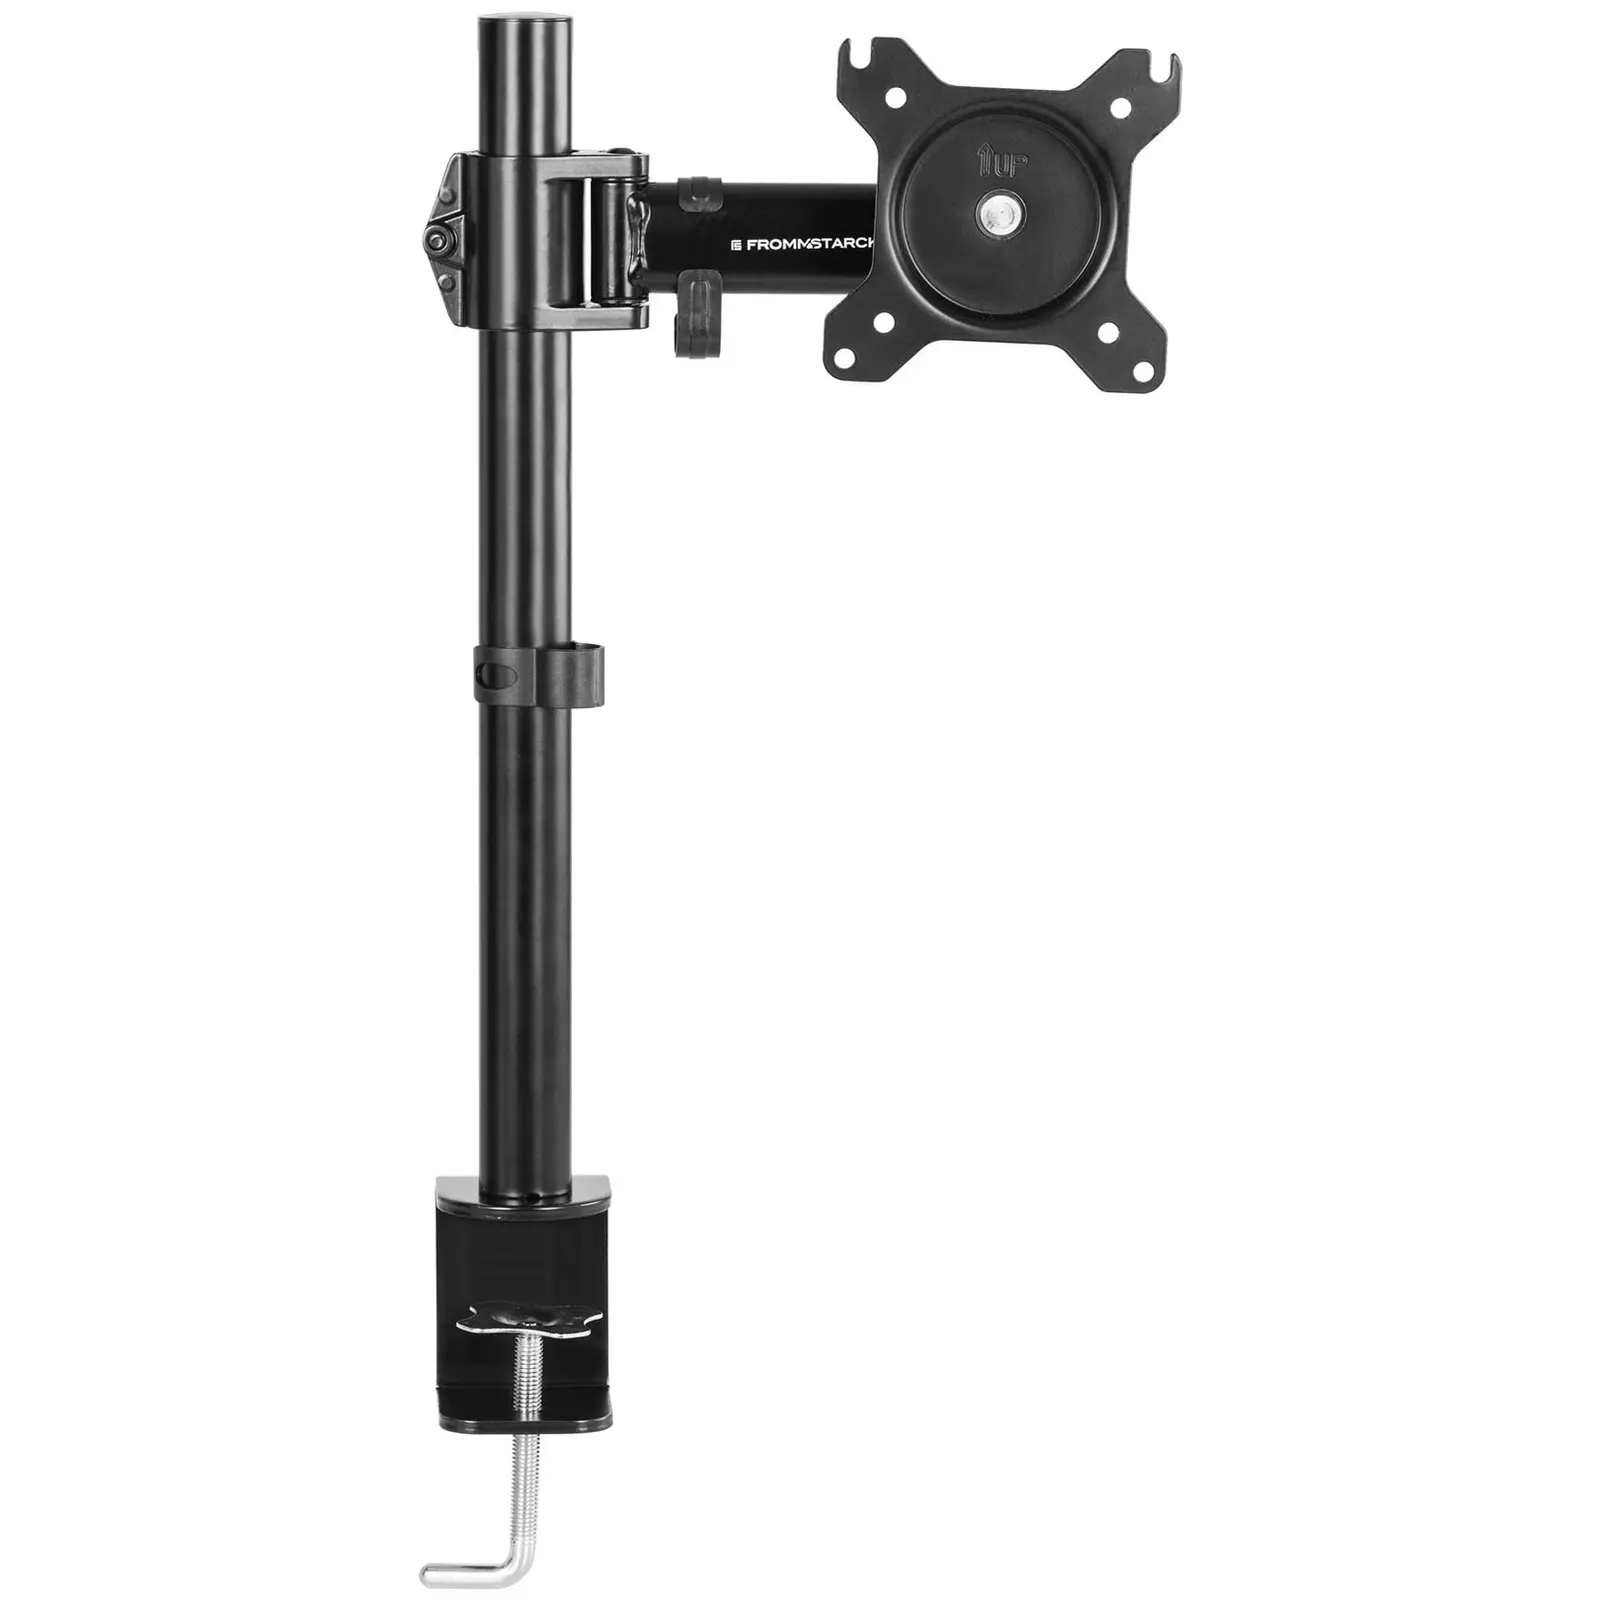 Monitor Mount - table clamp - 13" to 32" - cable management